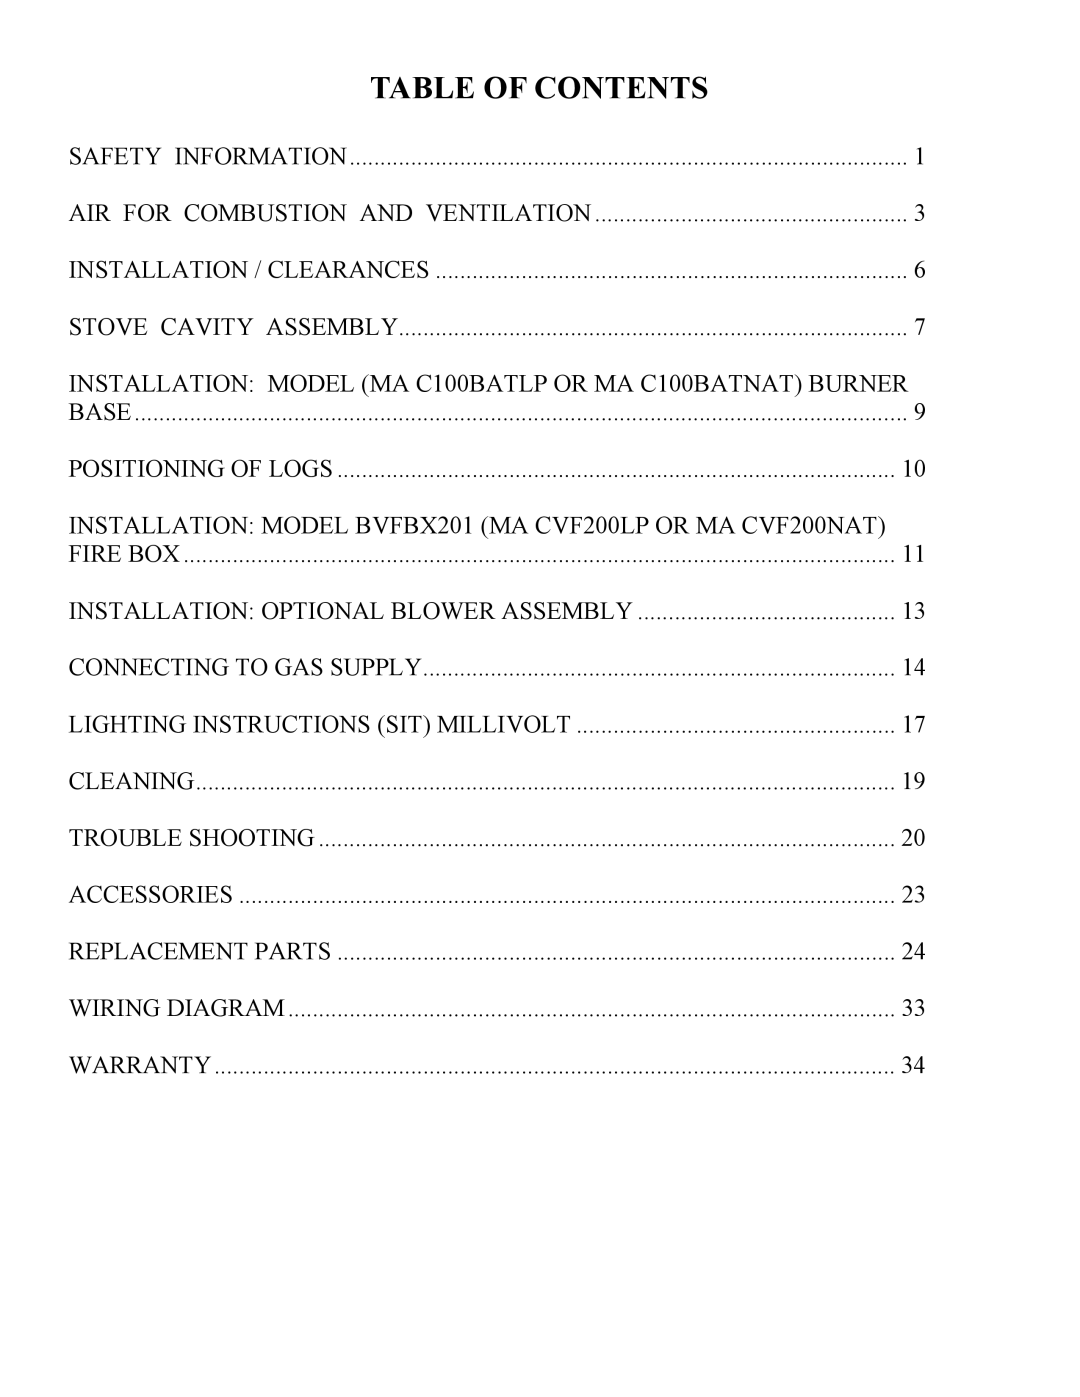 New Buck Corporation GAS STOVE HEATER installation manual Table Of Contents 